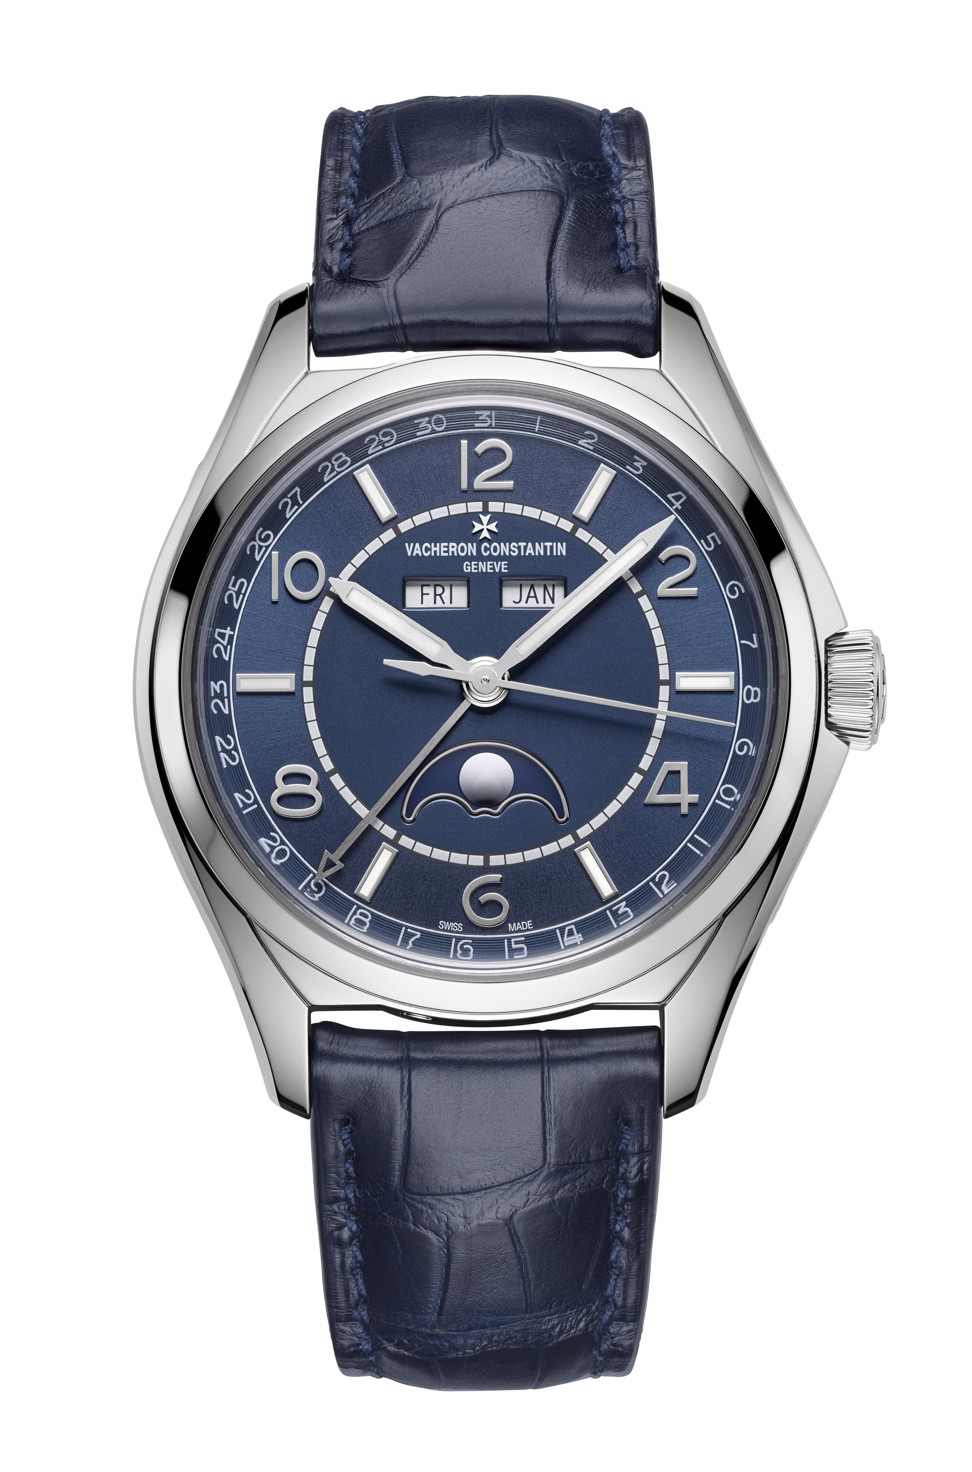 Vacheron Constantin's Fiftysix Complete Calendar Moonphase watch with the new Petro Blue dial